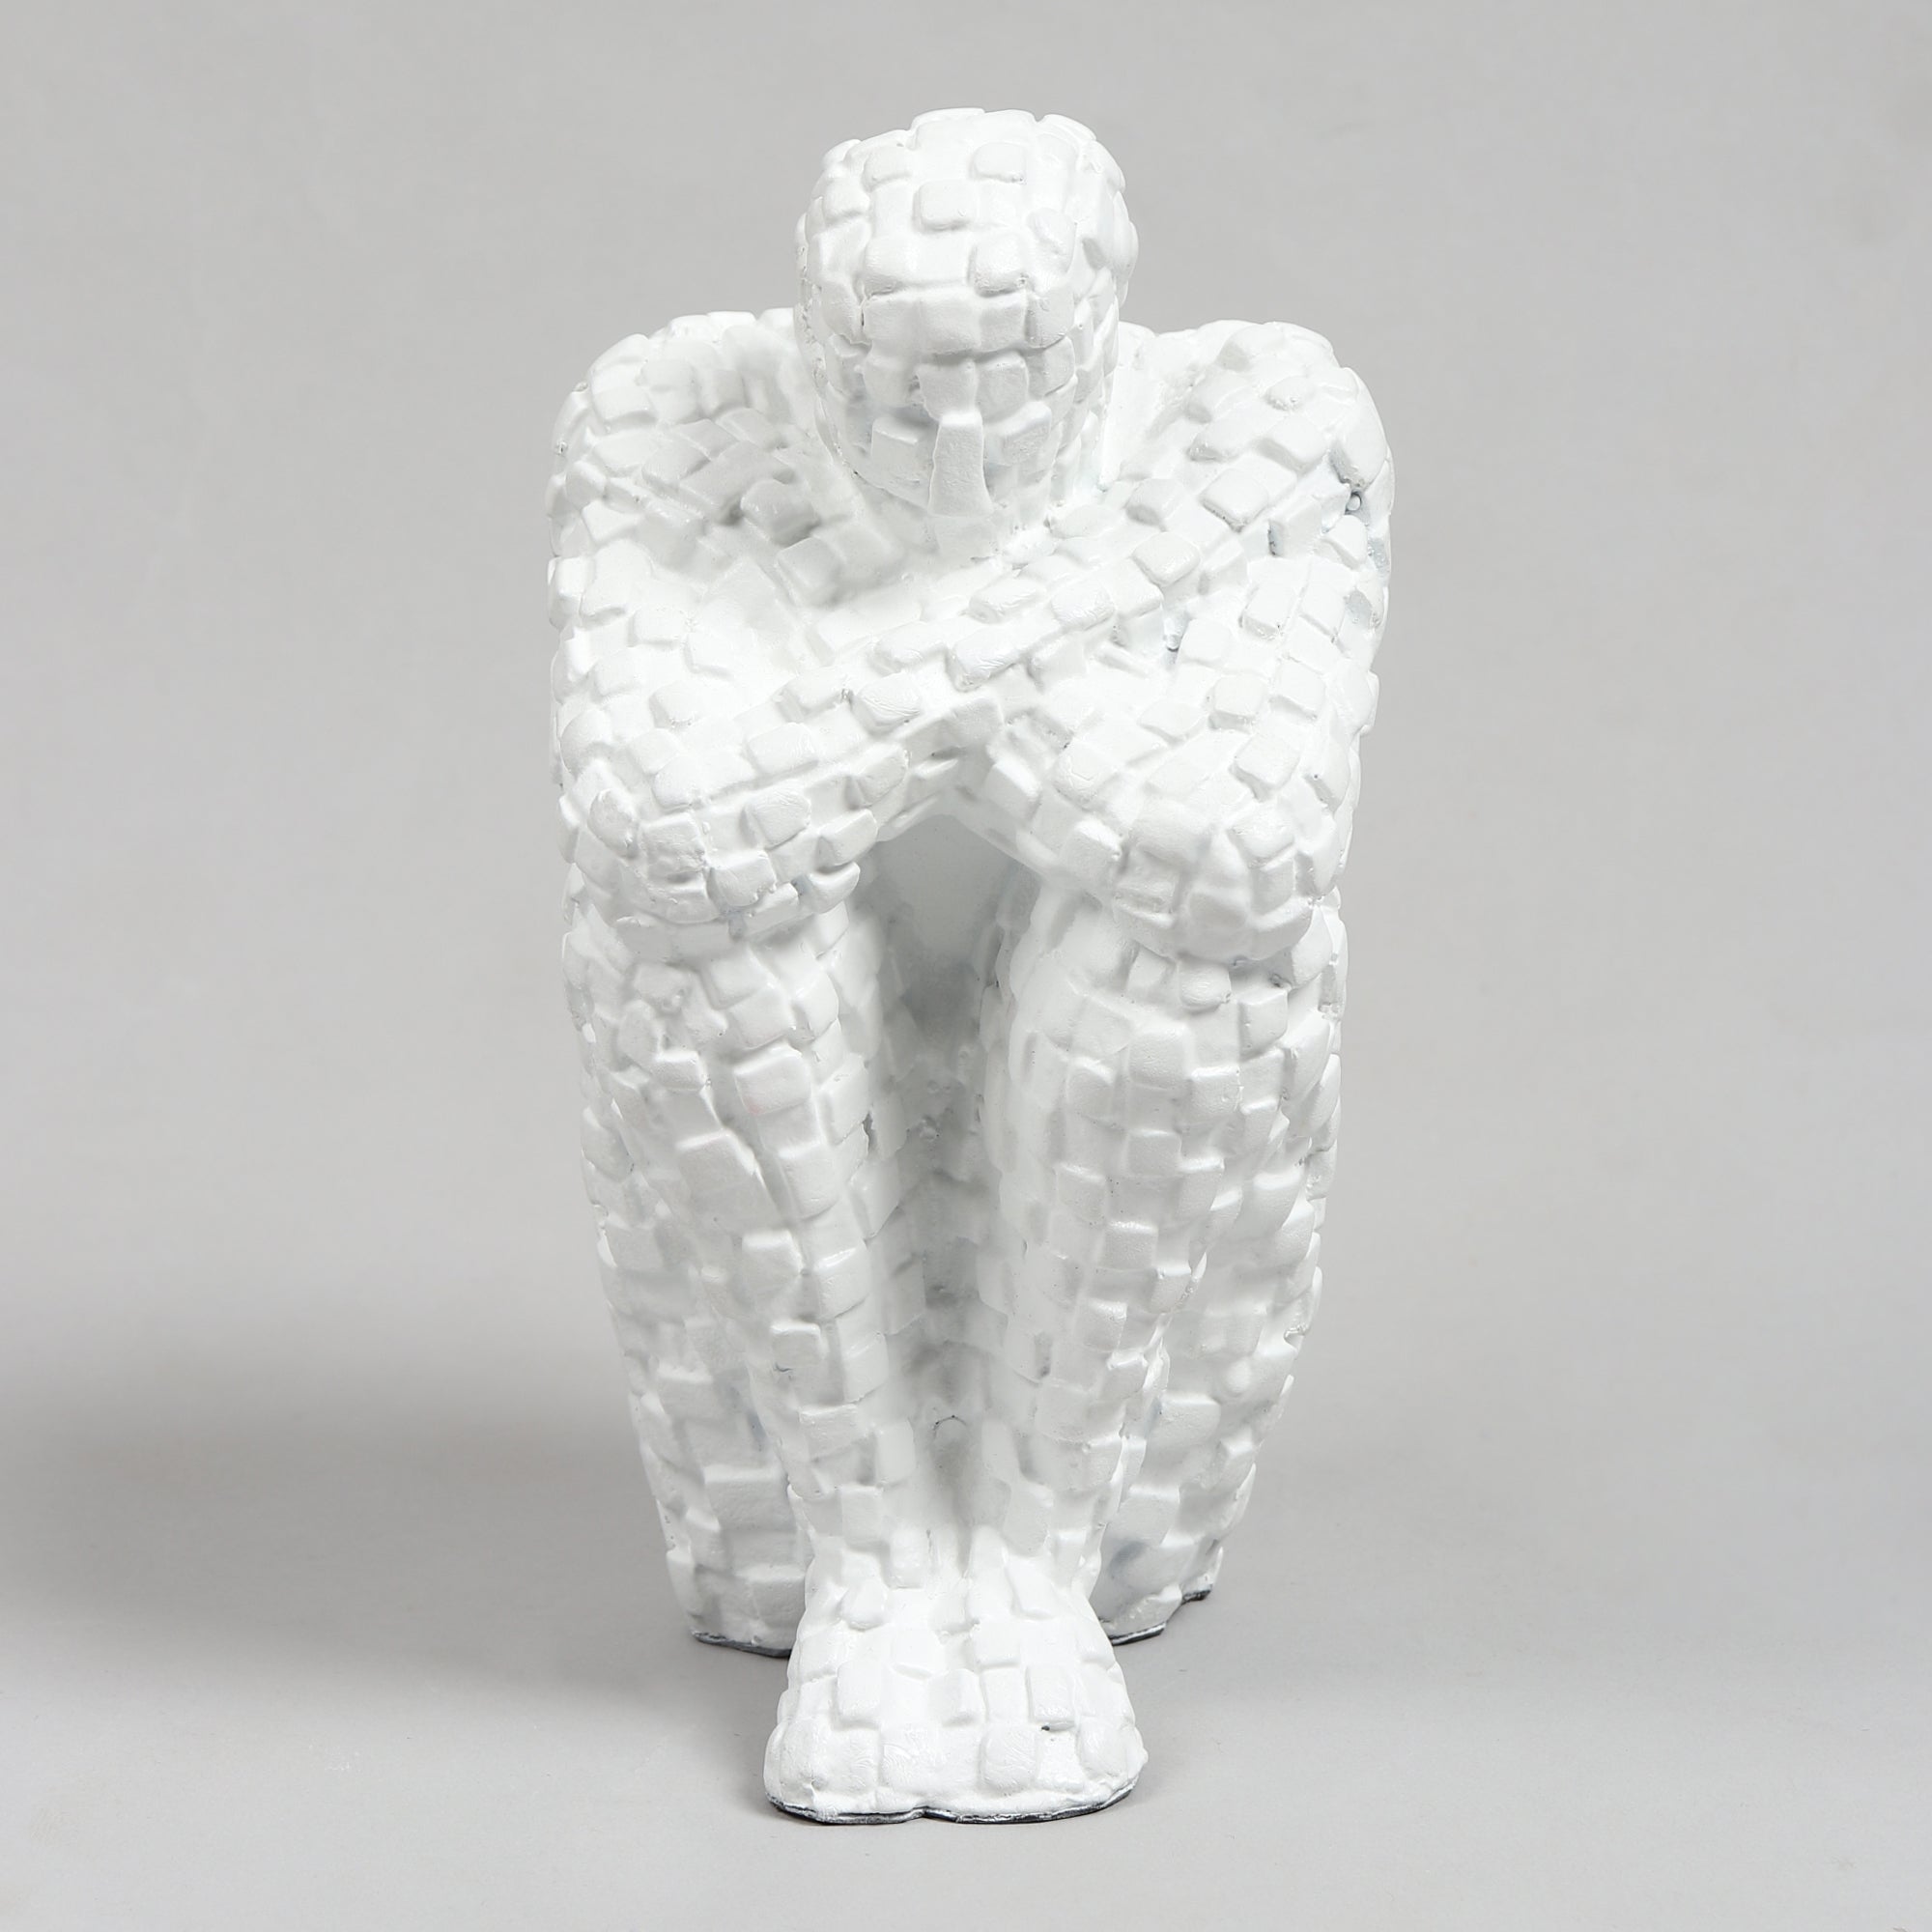 Secluded Thinker in White